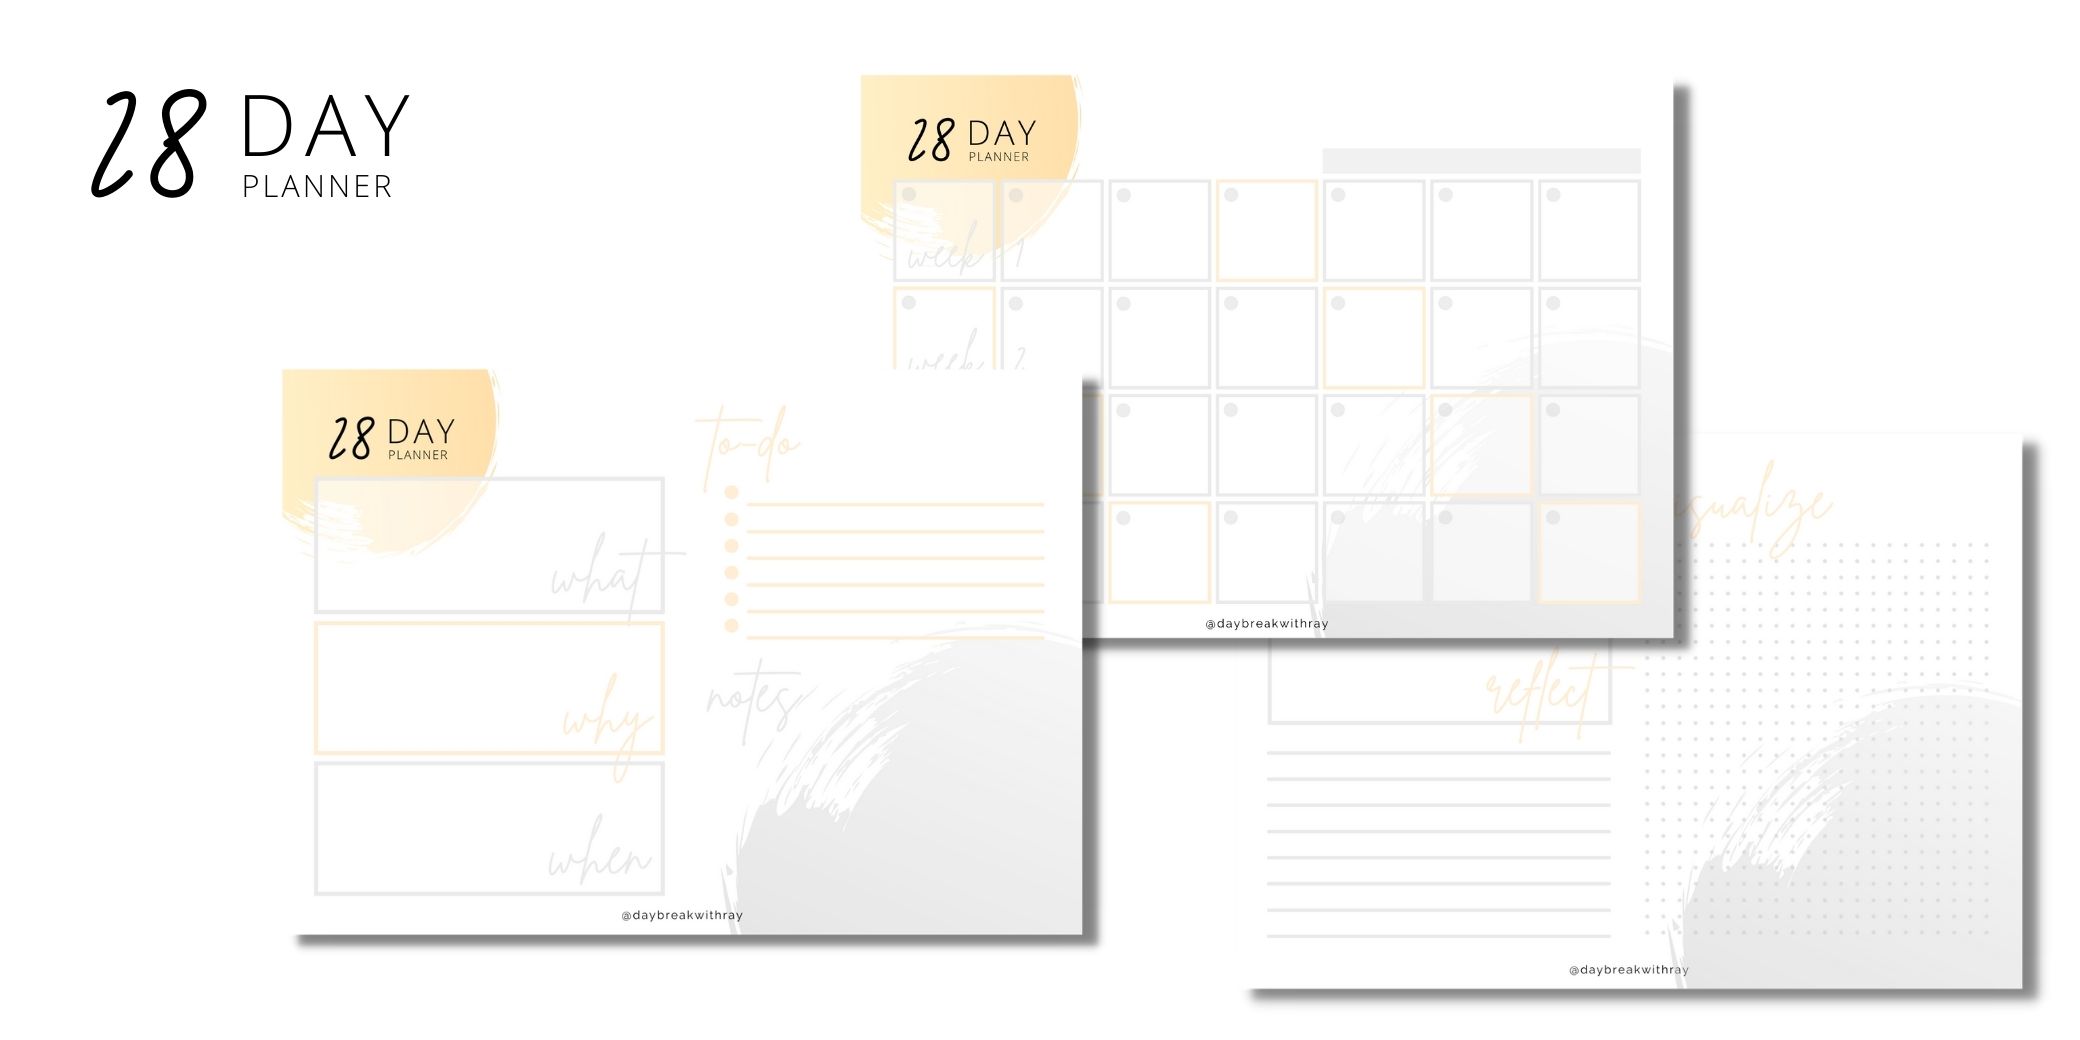 28Day Planner How to Plan Your Goal and Secure Your Success